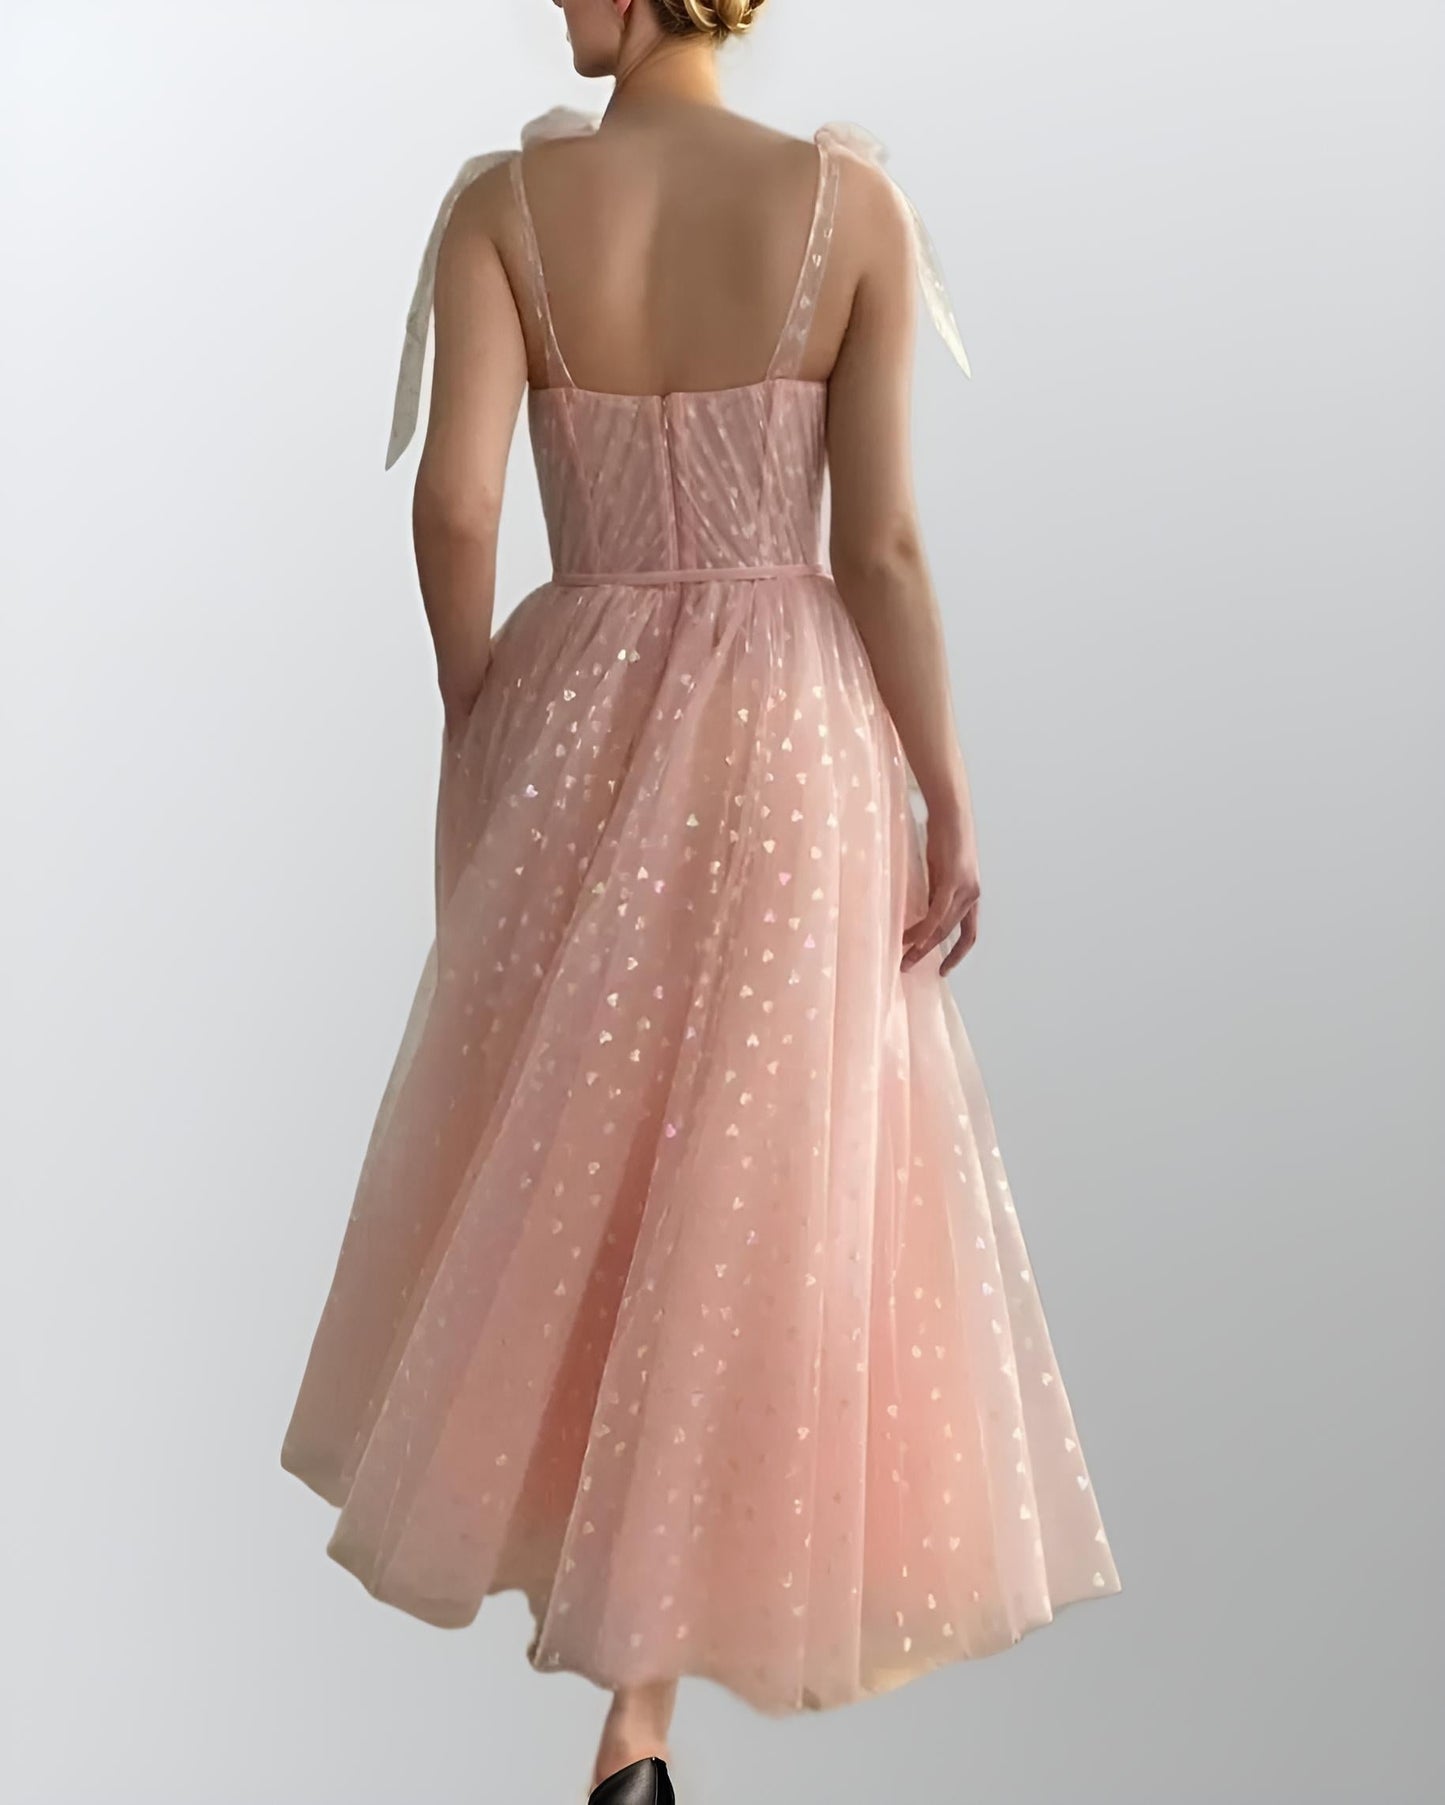 PETRA Formal Couture Dress